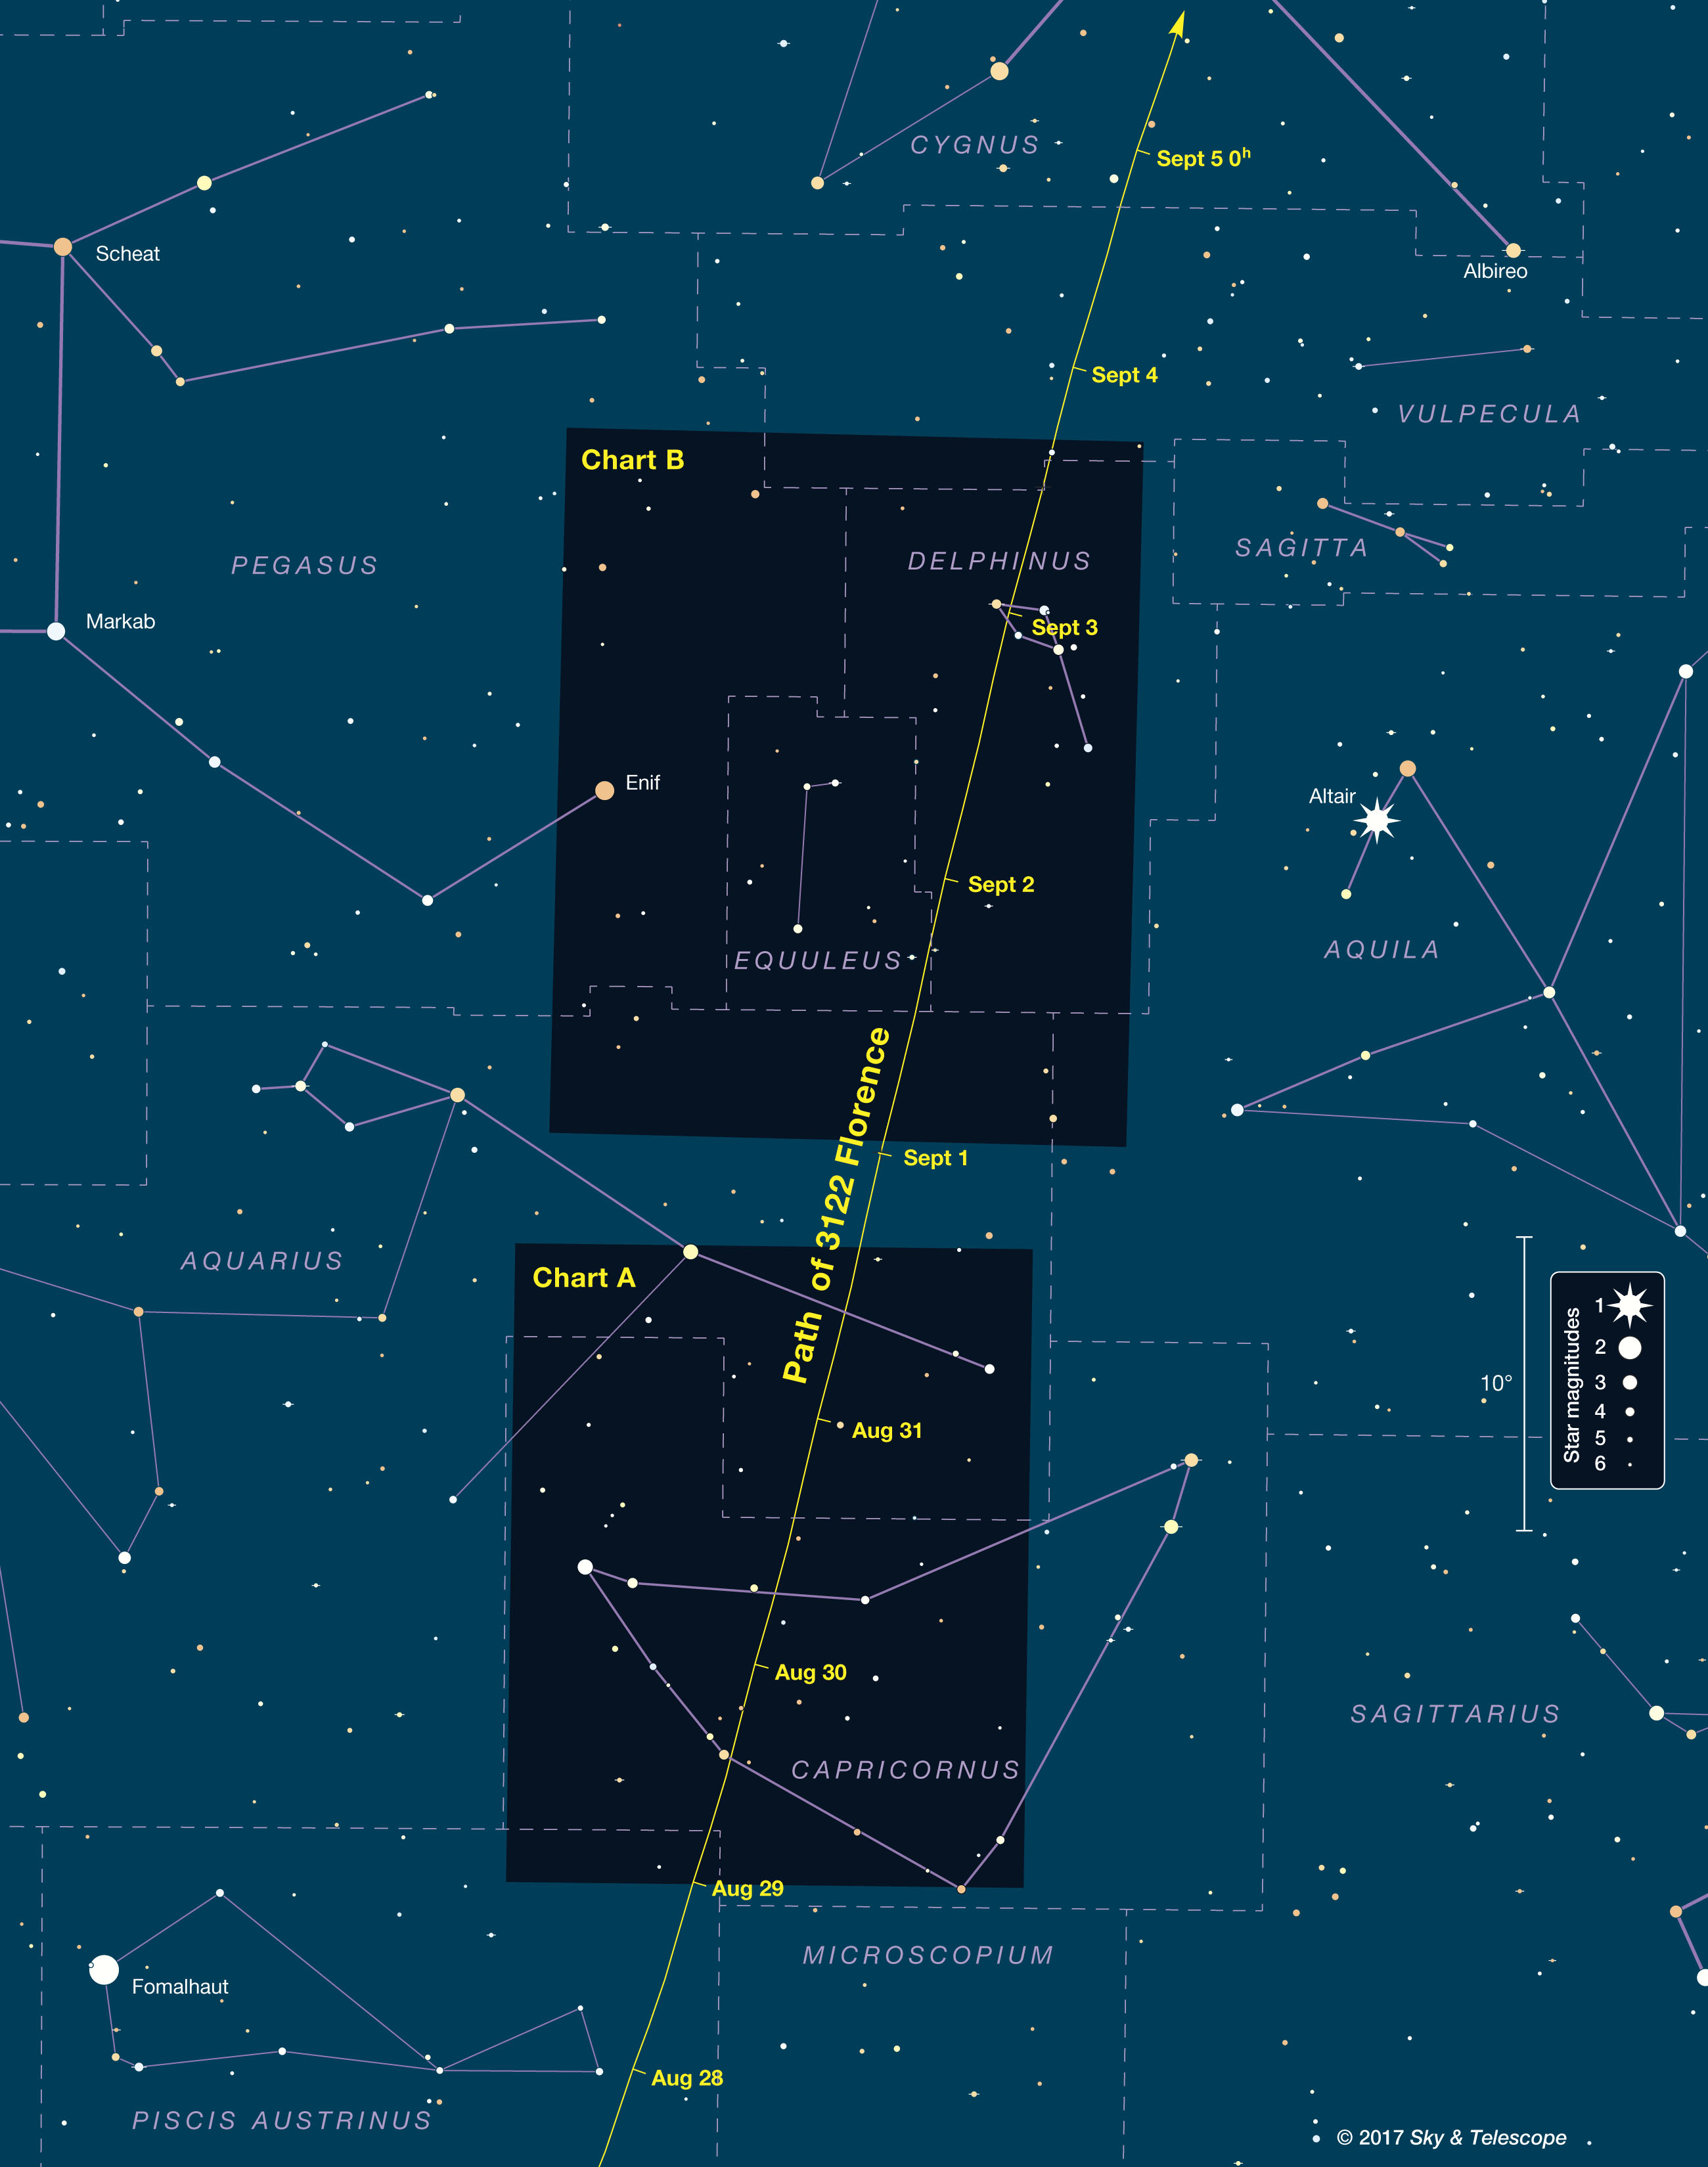 Star chart showing the position of asteroid Florence at 0h Universal Time (UT) each night, from Aug. 28 through Sept. 5. More detailed charts of the indicated regions are available at the Sky and Telescope website: <a href='http://wwwcdn.skyandtelescope.com/wp-content/uploads/3122-Florence-Chart-A-1.pdf'>Chart A</a> and <a href='http://wwwcdn.skyandtelescope.com/wp-content/uploads/3122-Florence-Chart-B-1.pdf'>Chart B</a>. Credit: Sky and Telescope.